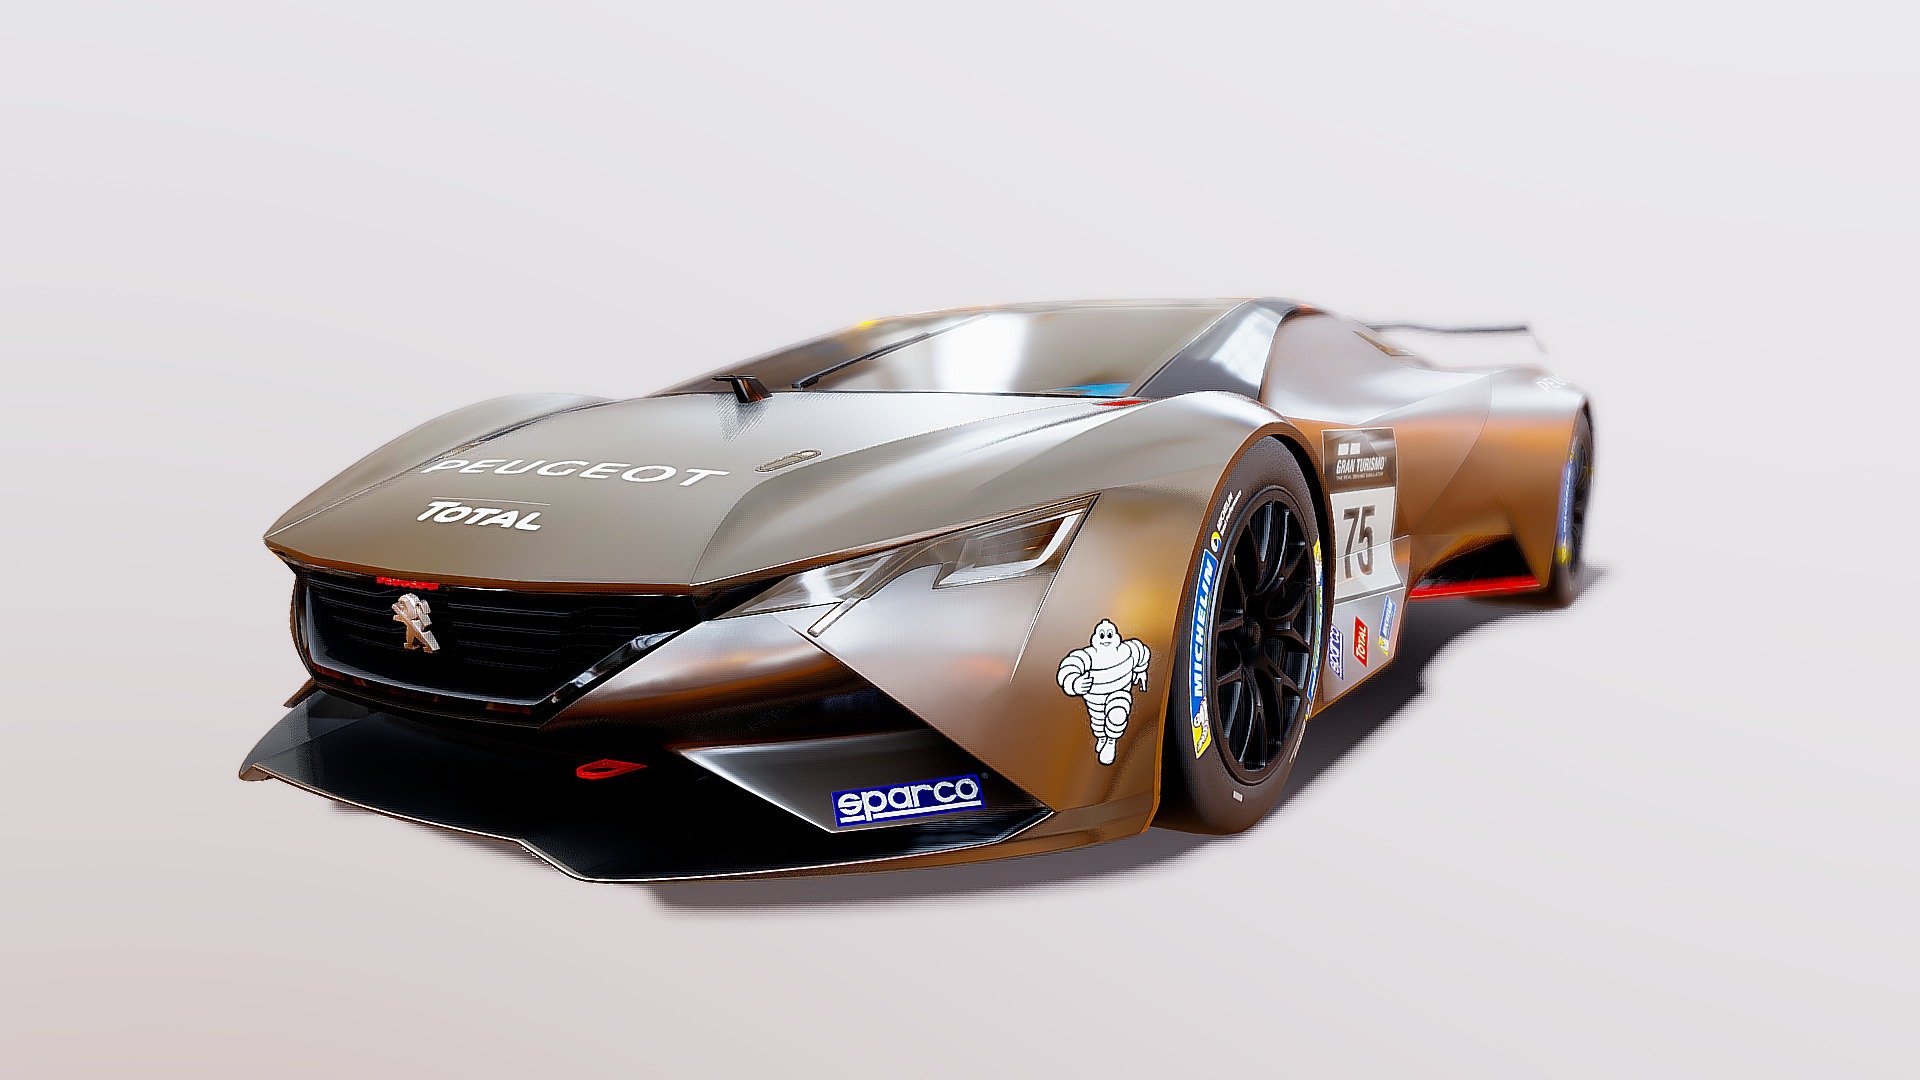 The PEUGEOT Vision Gran Turismo Gr.3 is a race car produced by Peugeot, based on the PEUGEOT Vision Gran Turismo. It appears in Gran Turismo Sport and Gran Turismo 7.The Peugeot VGT was the base model for this Gran Turismo Gr.3 original race car. To meet Gr.3 specs, the engine and chassis were heavily modified. On the outside, you'll notice a rear wing and front splitter were added to improve the car's aerodynamics.The livery on this car and both the Peugeot RCZ Gr.3 and Peugeot RCZ Gr.4 is based on Peugeot 3008 DKR, which won the 2016 and 2017 (in Maxi specification) Dakar Rally.
In GT Sport's closed beta test version, the car simply uses a plain livery based on Flash color option, and even uses the wheels of the original car it was based on. The final wheel design was also used by the RCZ Gr.3 3d model